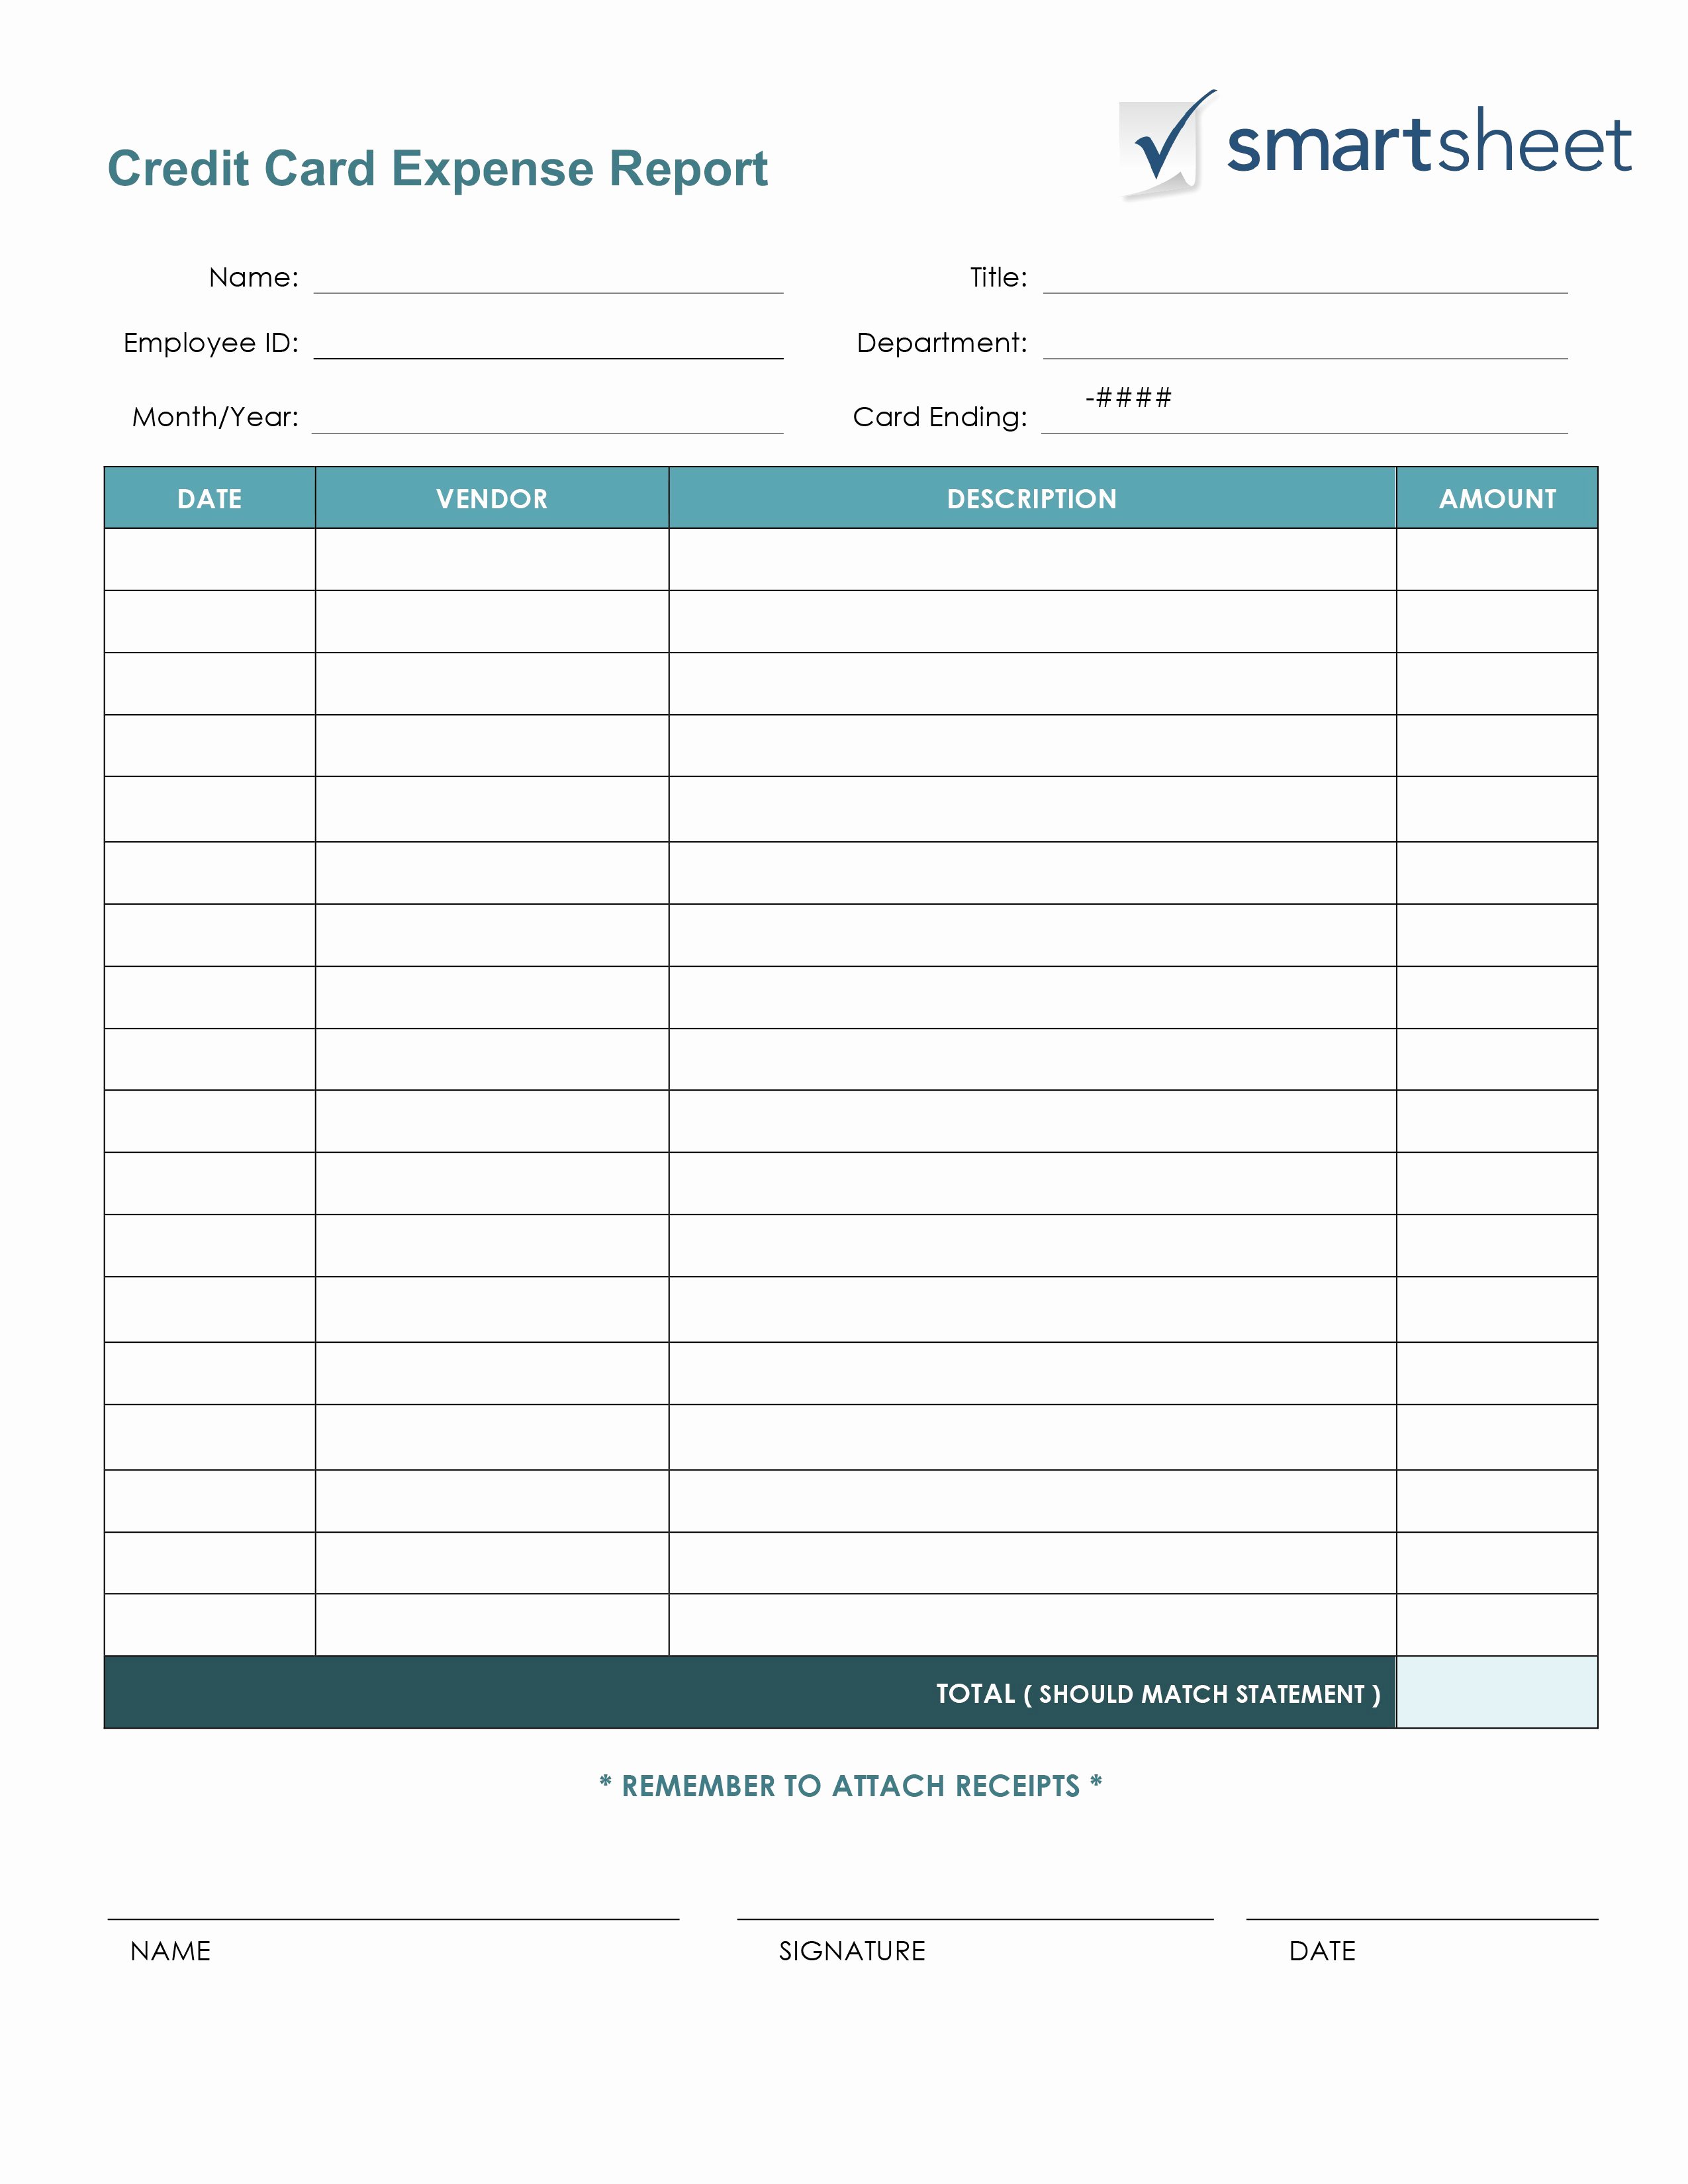 Basic Expense Report Template New Free Expense Report Templates Smartsheet